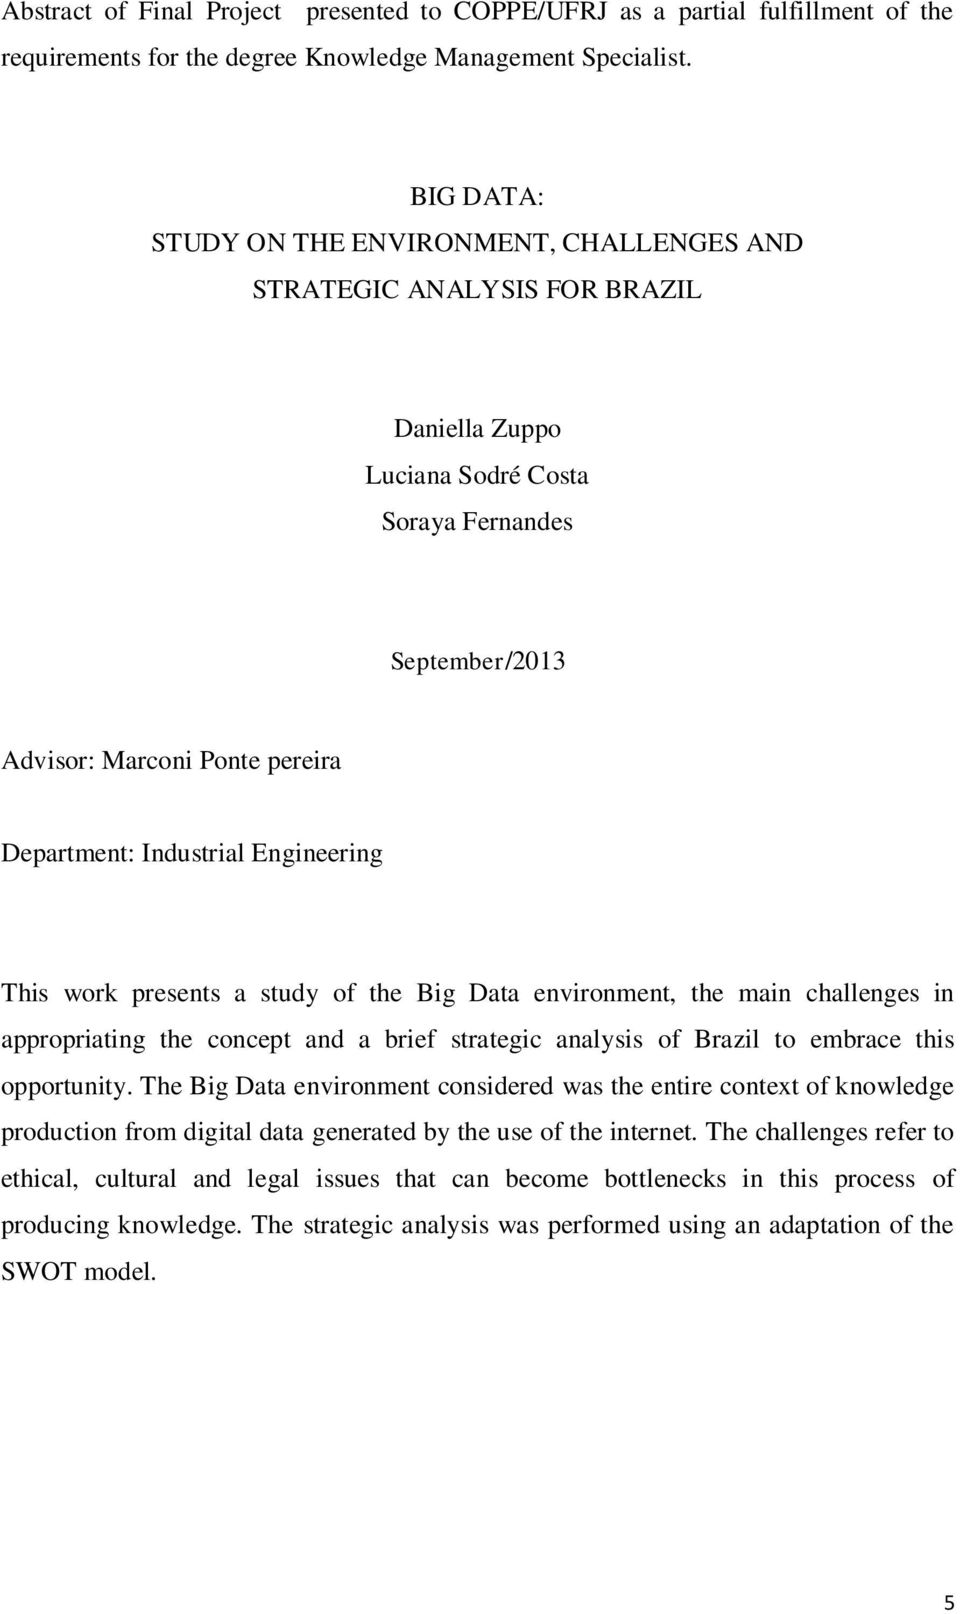 Industrial Engineering This work presents a study of the Big Data environment, the main challenges in appropriating the concept and a brief strategic analysis of Brazil to embrace this opportunity.